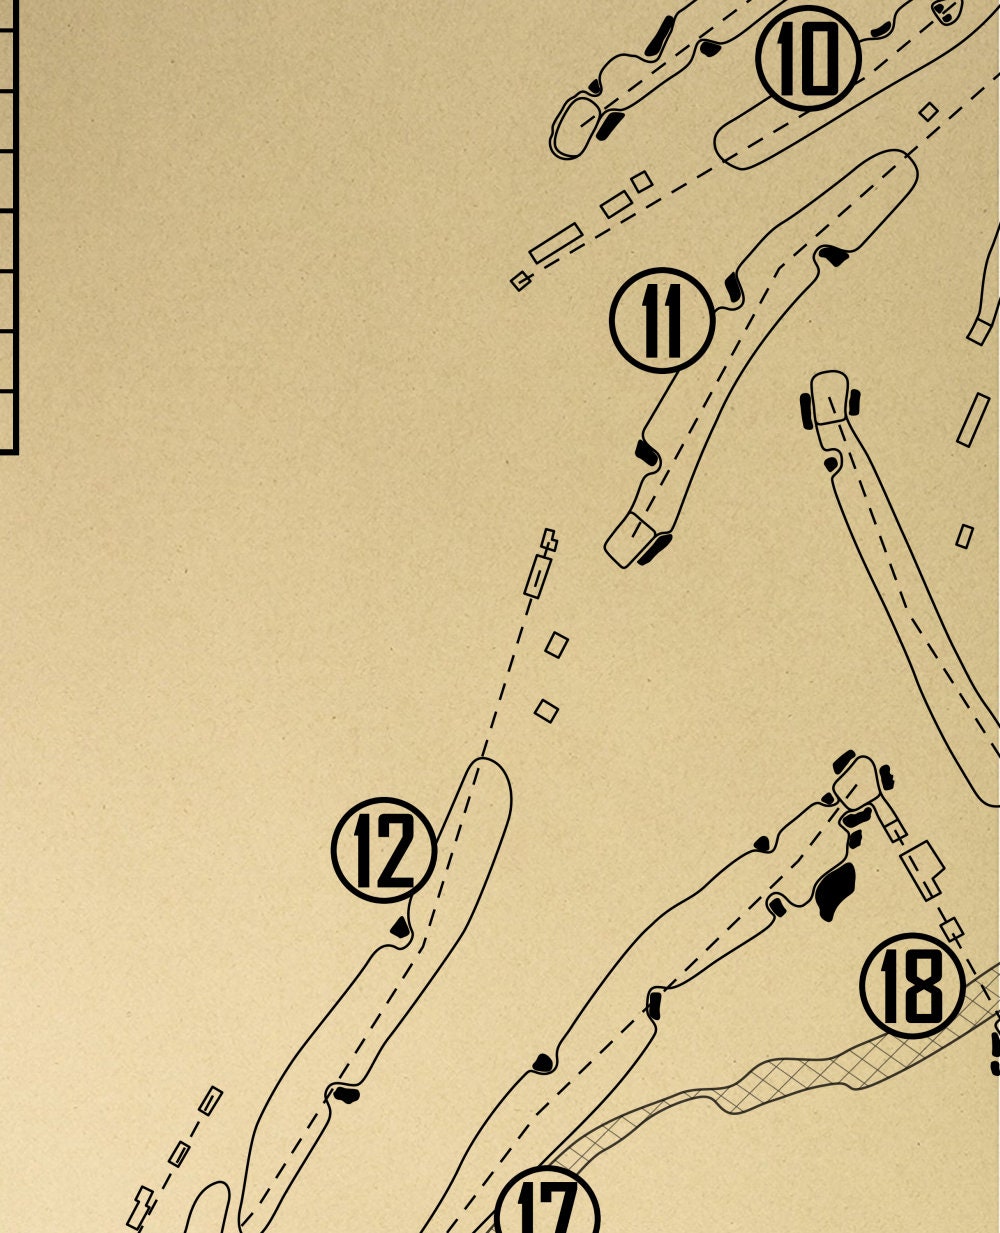 The Greenbrier Old White Course Outline (Print)